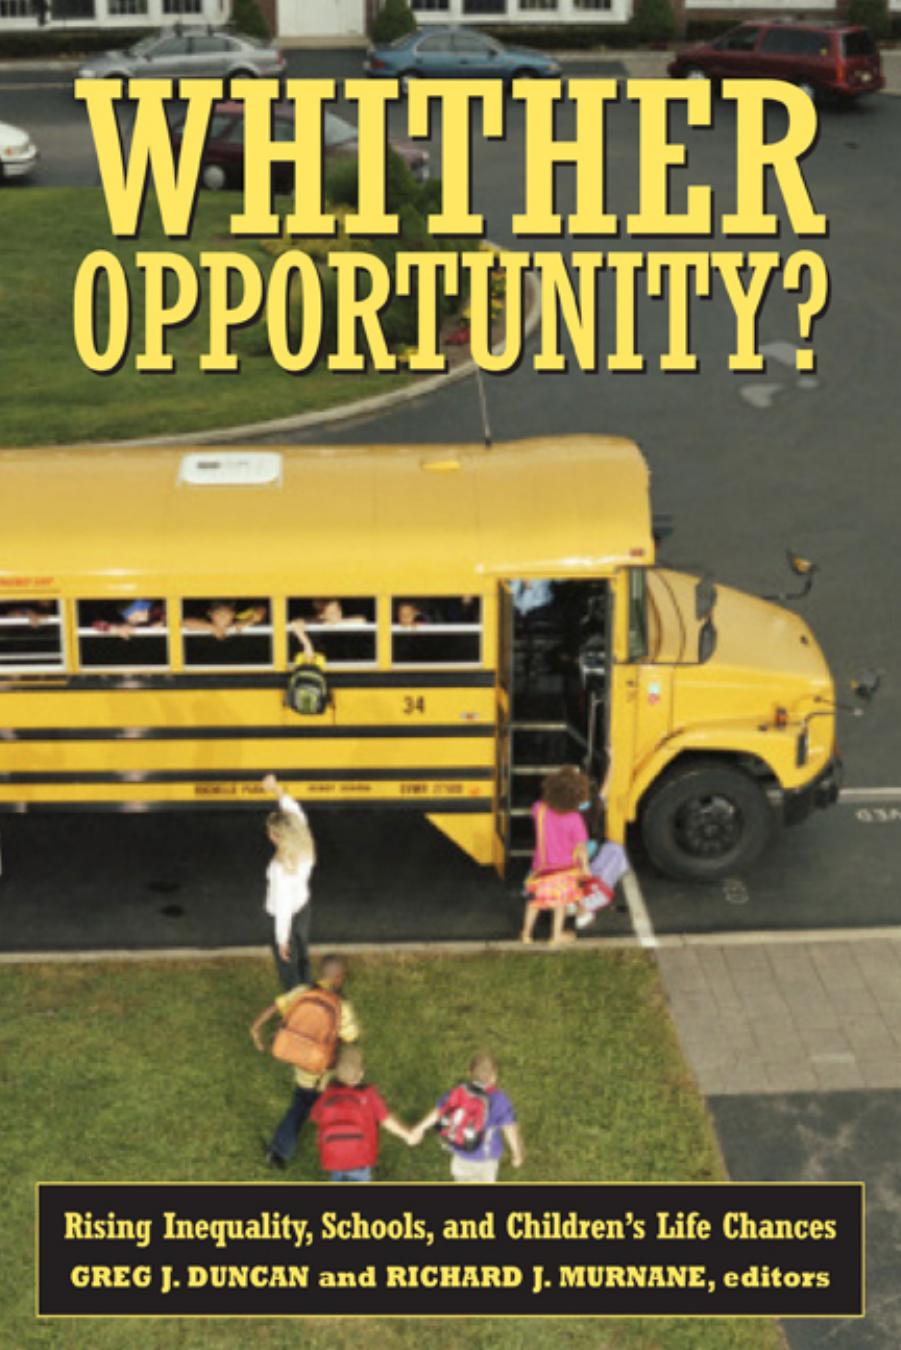 Whither Opportunity? : Rising Inequality, Schools, and Children's Life Chances by Greg J. Duncan; Richard J. Murnane